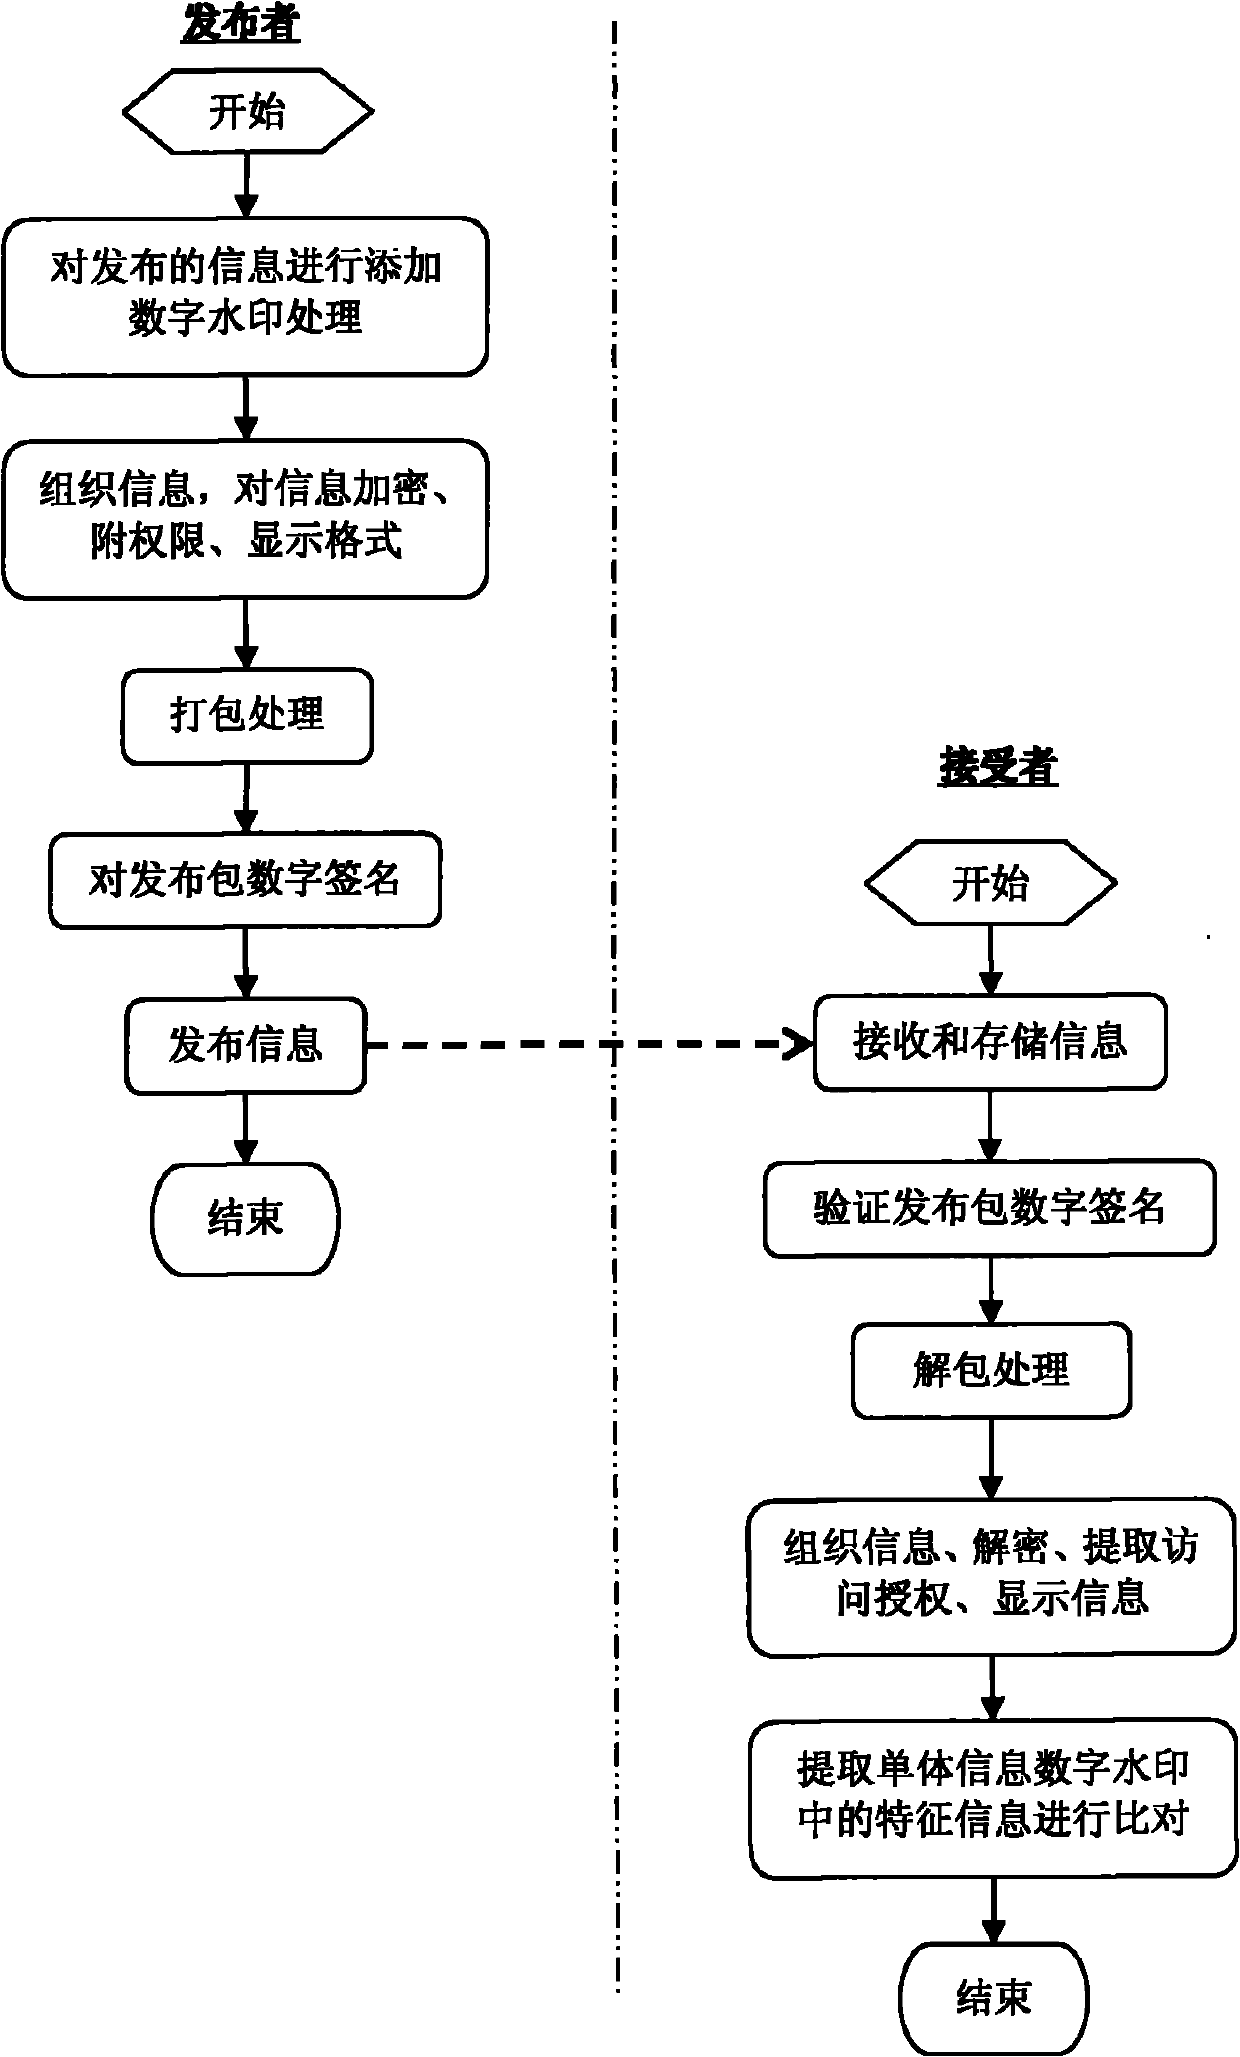 Network information counterfeiting issuing system, counterfeiting receiving system, and counterfeiting system and method